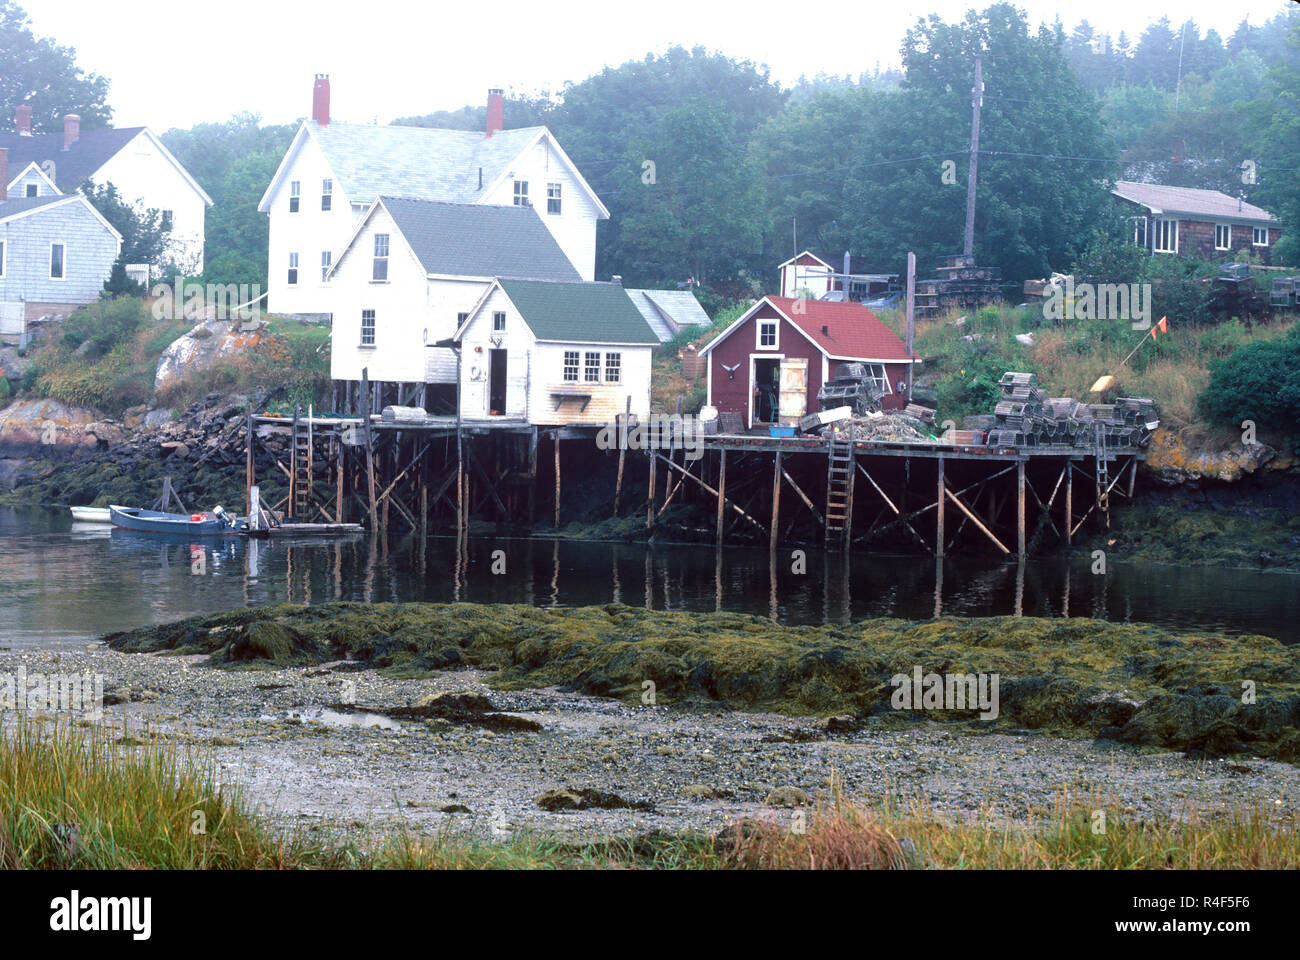 A commercial lobster business on Southport Island, Maine, USA Stock Photo